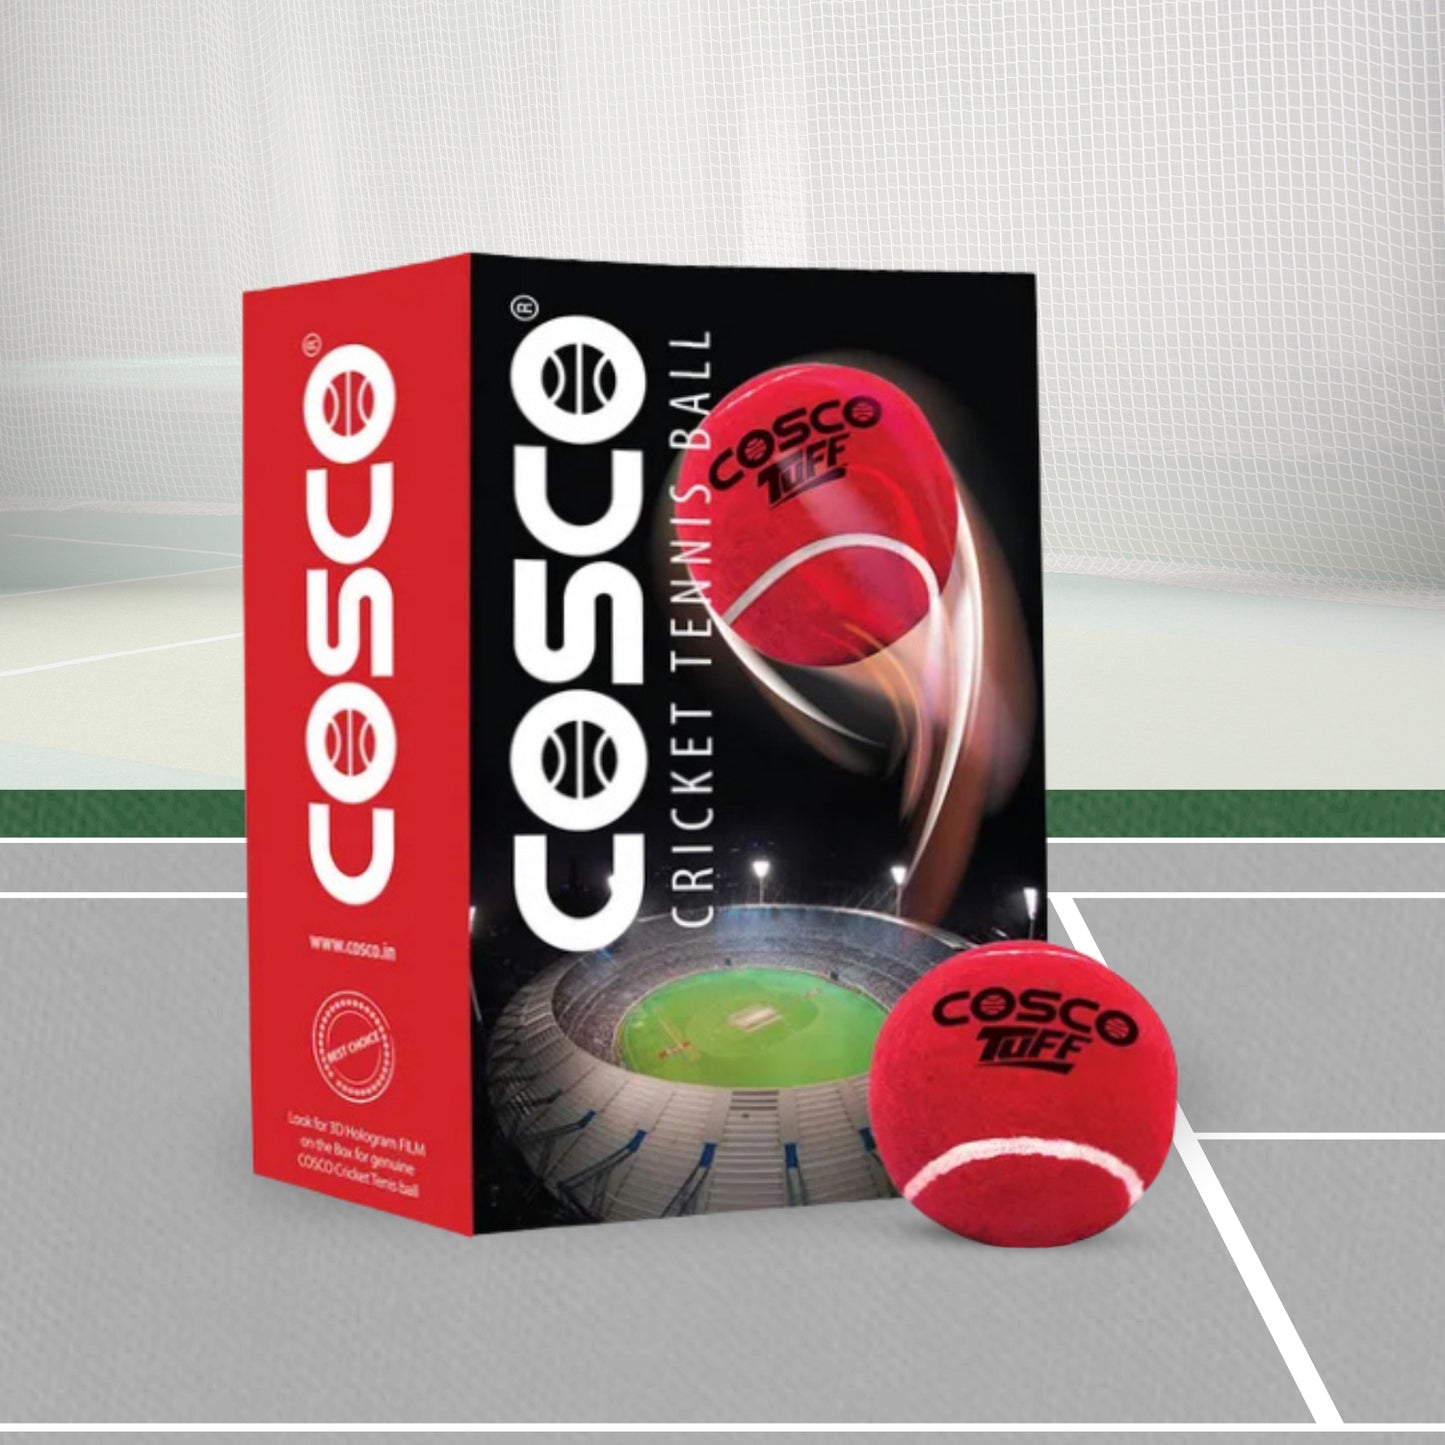 Cosco Tuff Heavy Weight Tennis Cricket Ball, Pack of 6 (Red)